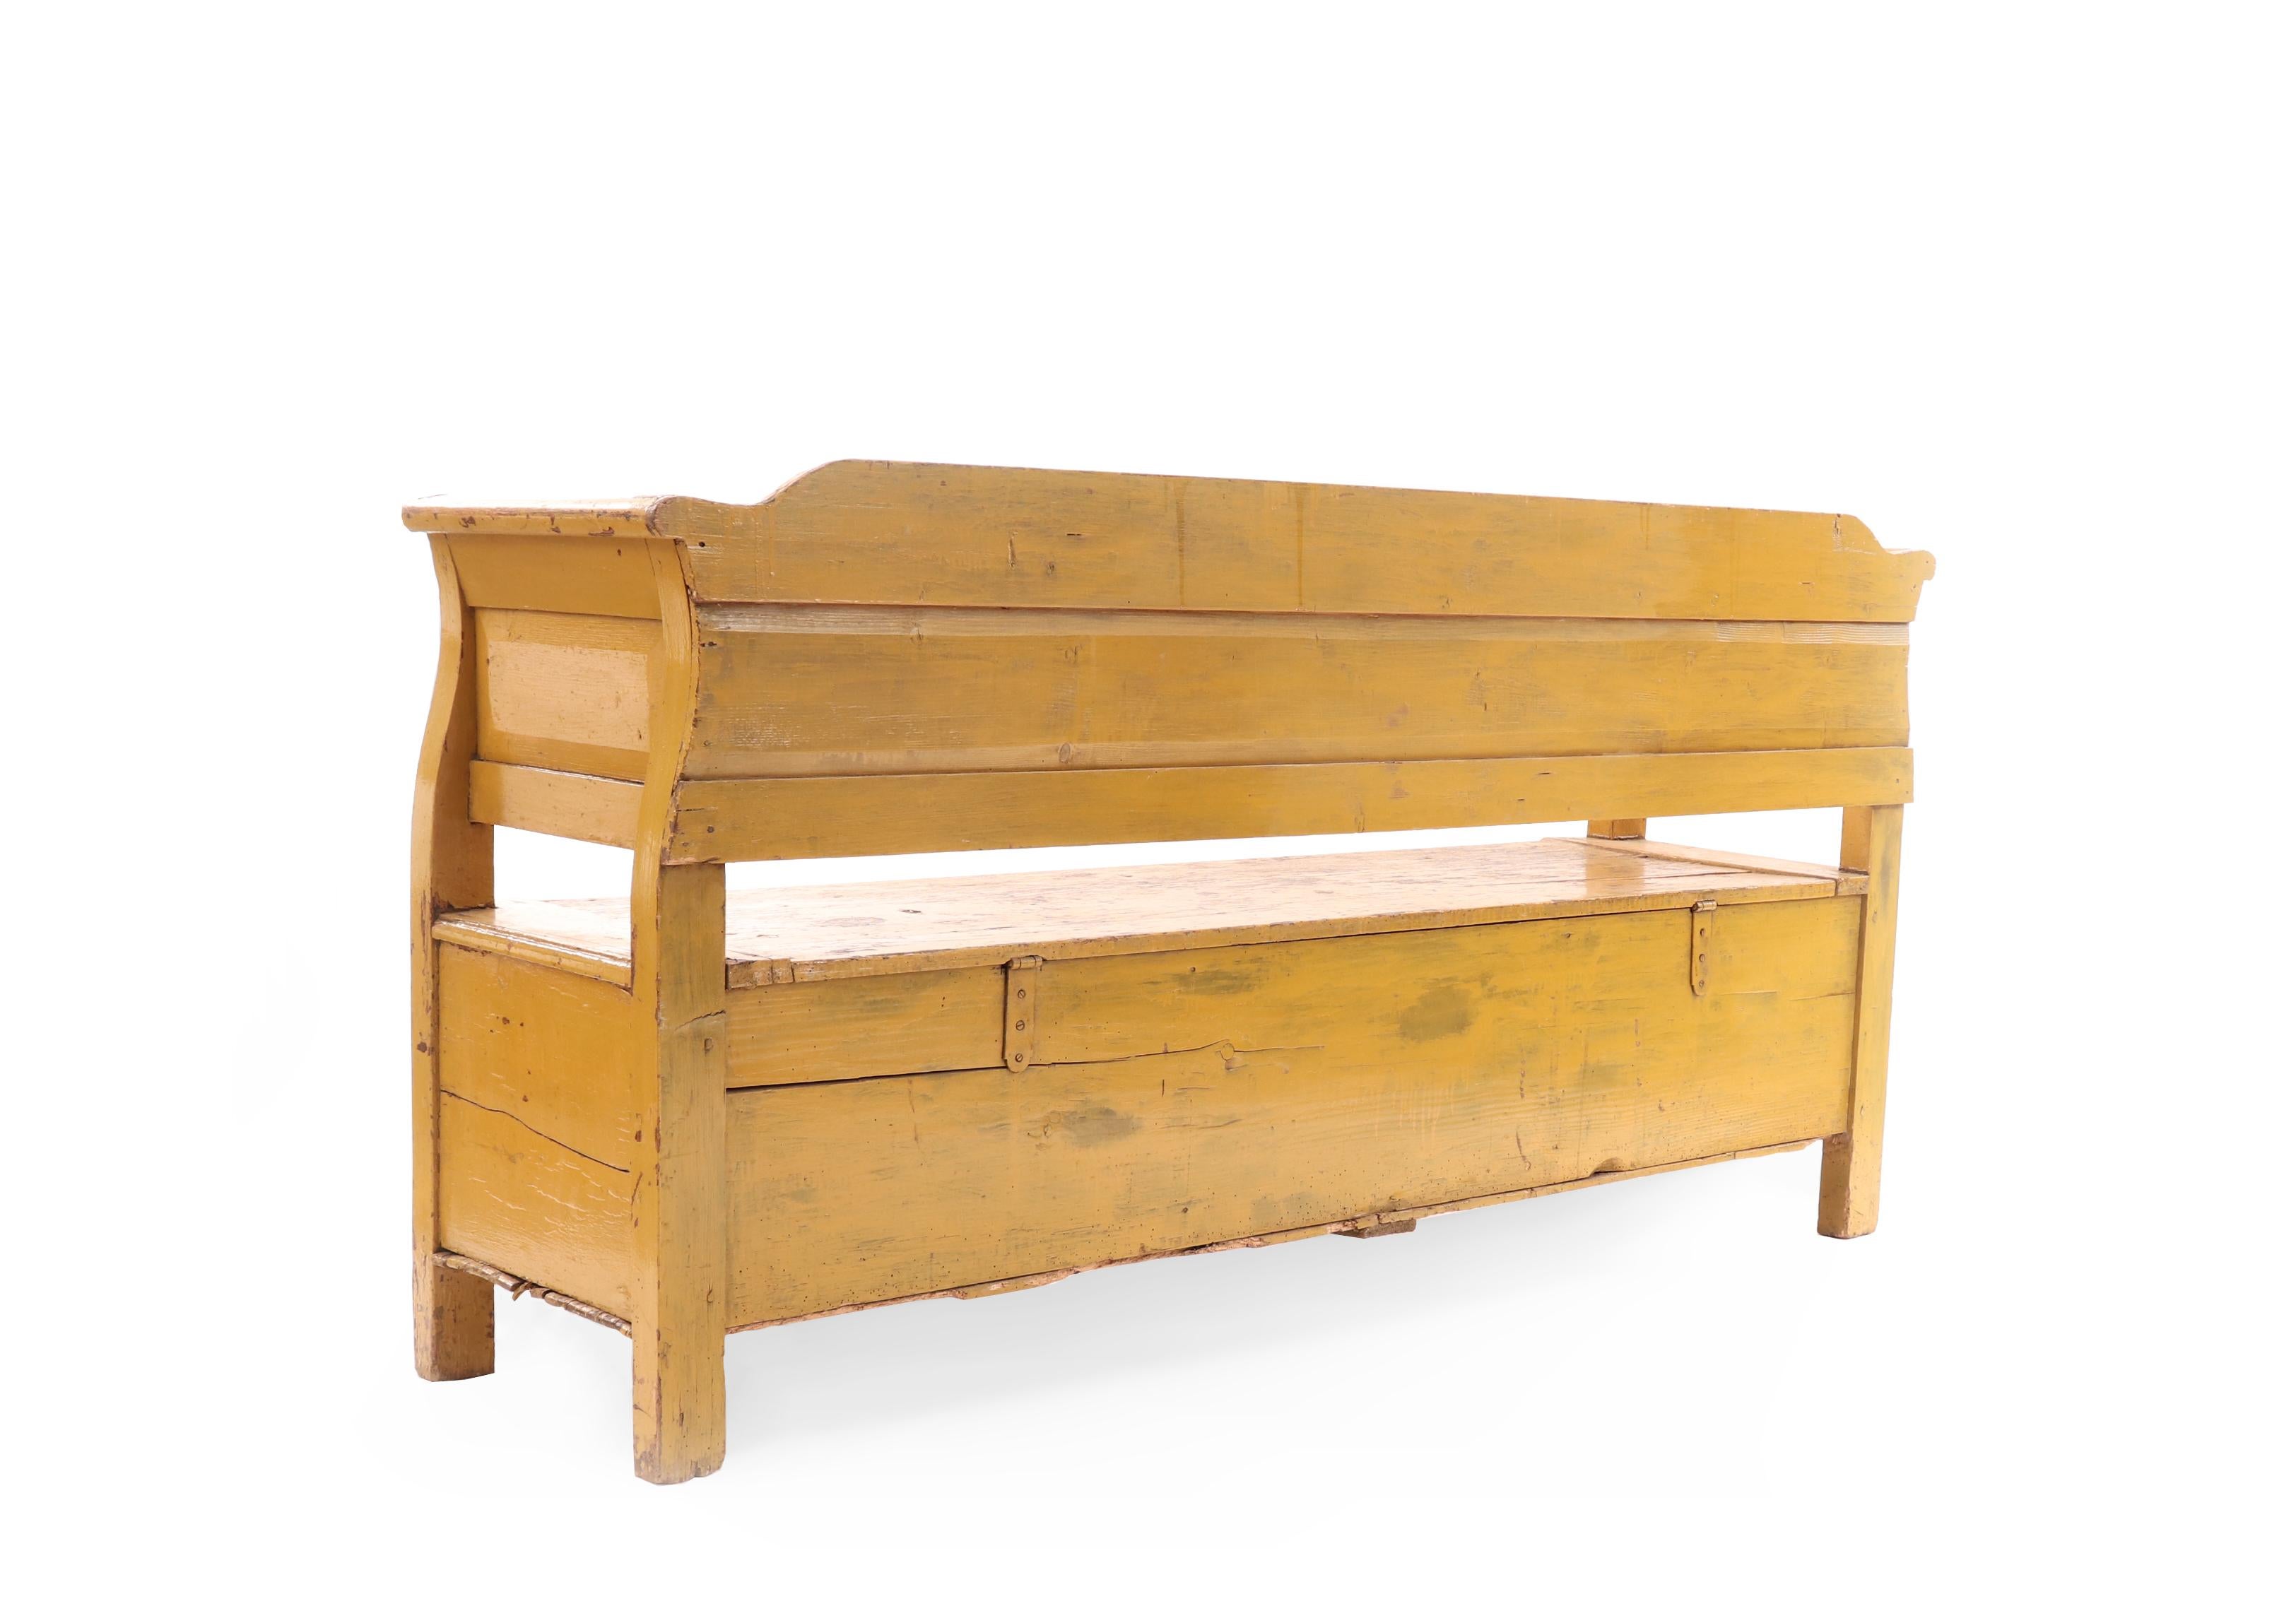 Country 19th Century Rustic Canadian Yellow Wooden Bench For Sale